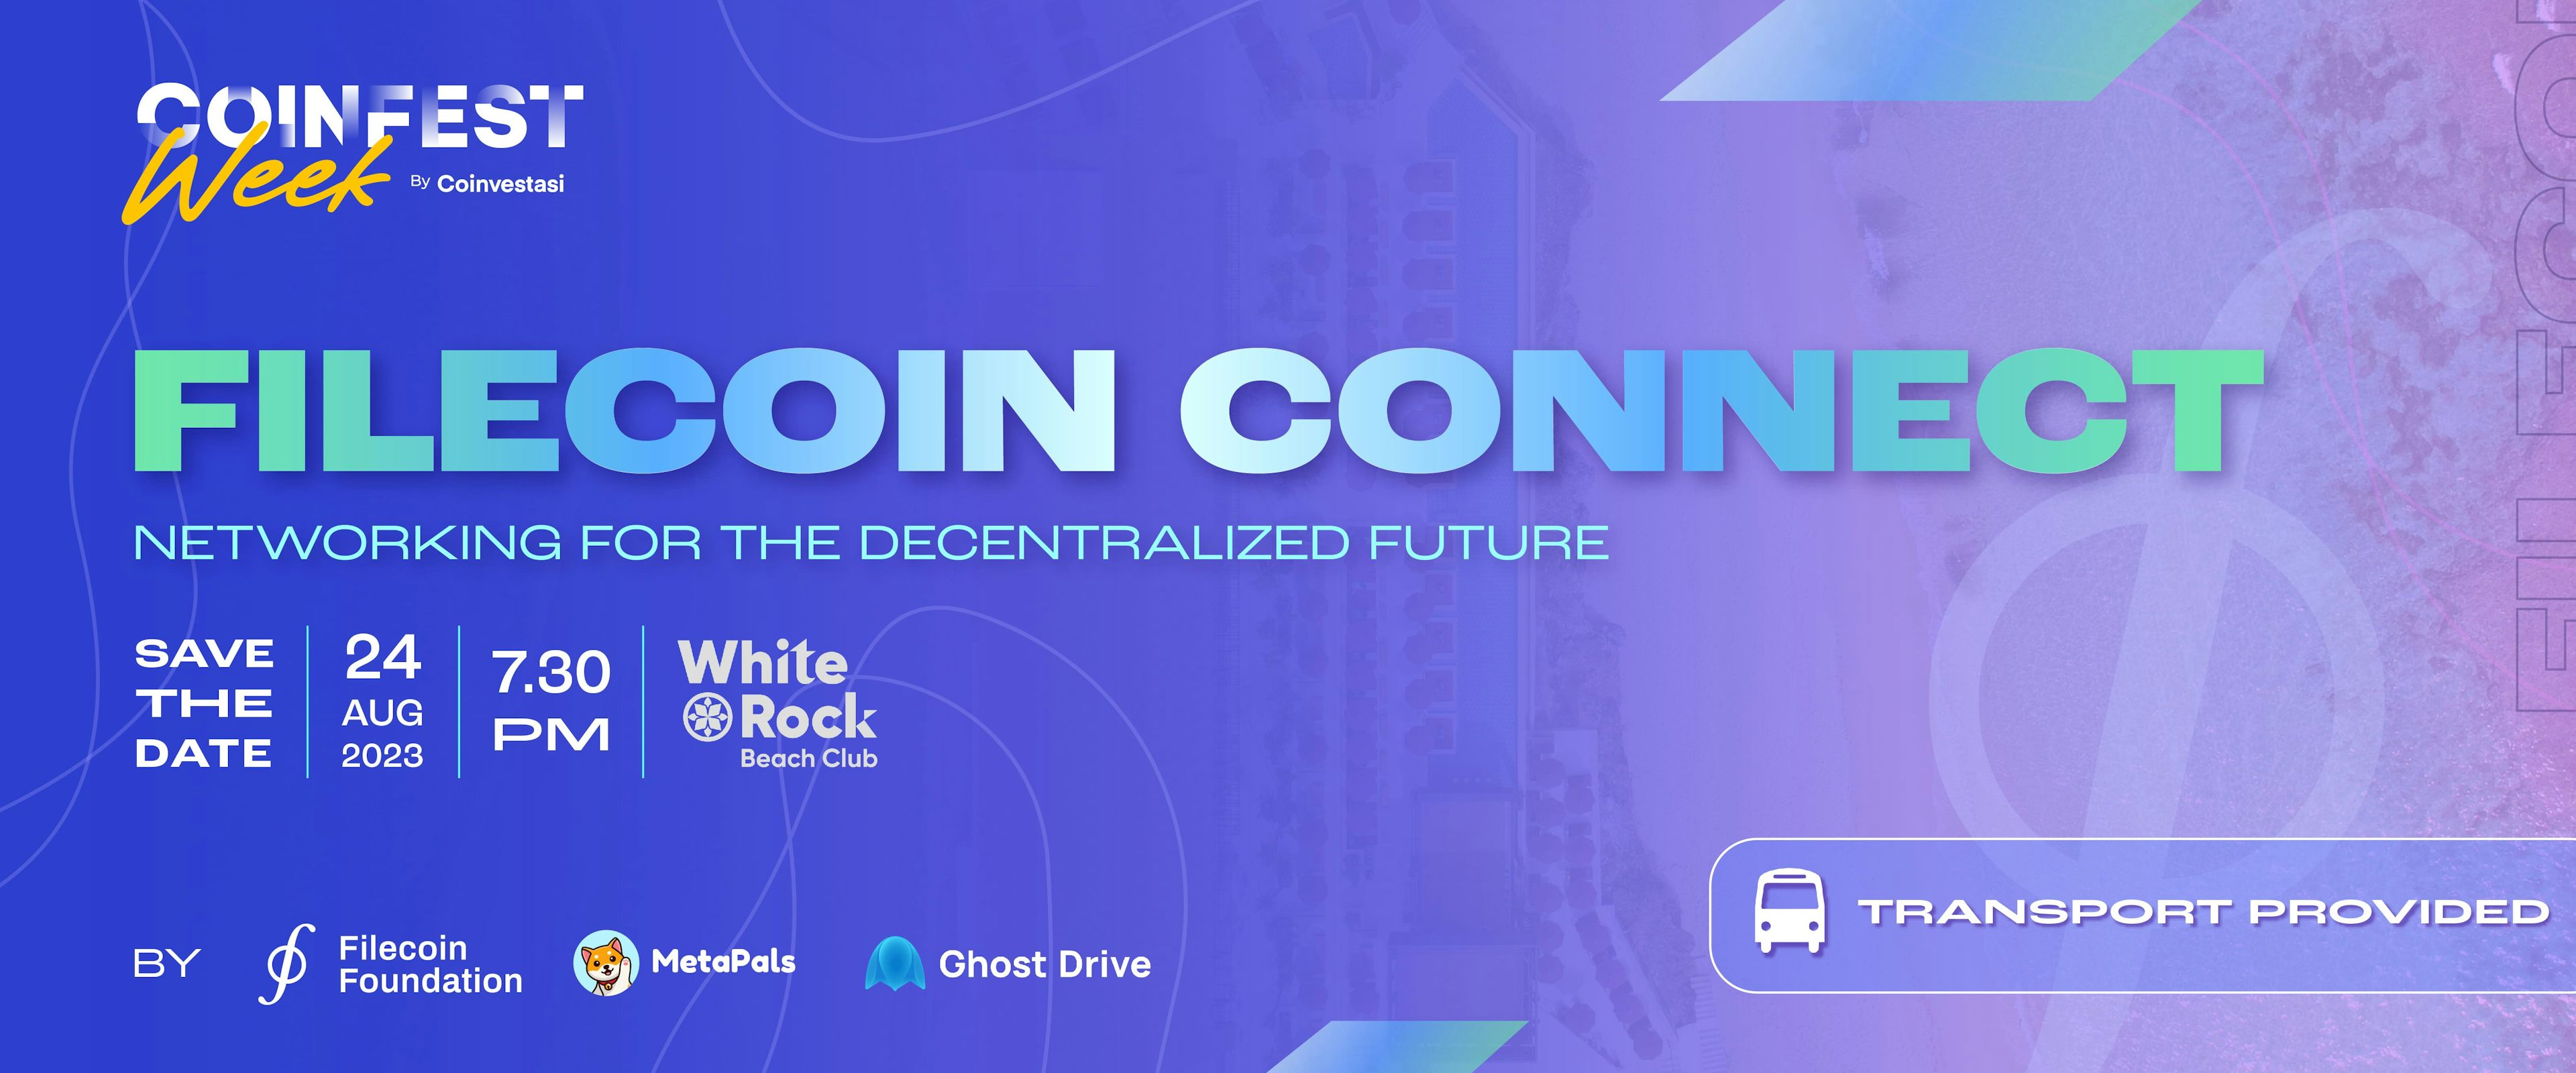 MetaPals, Filecoin Foundation, Ghost Drive